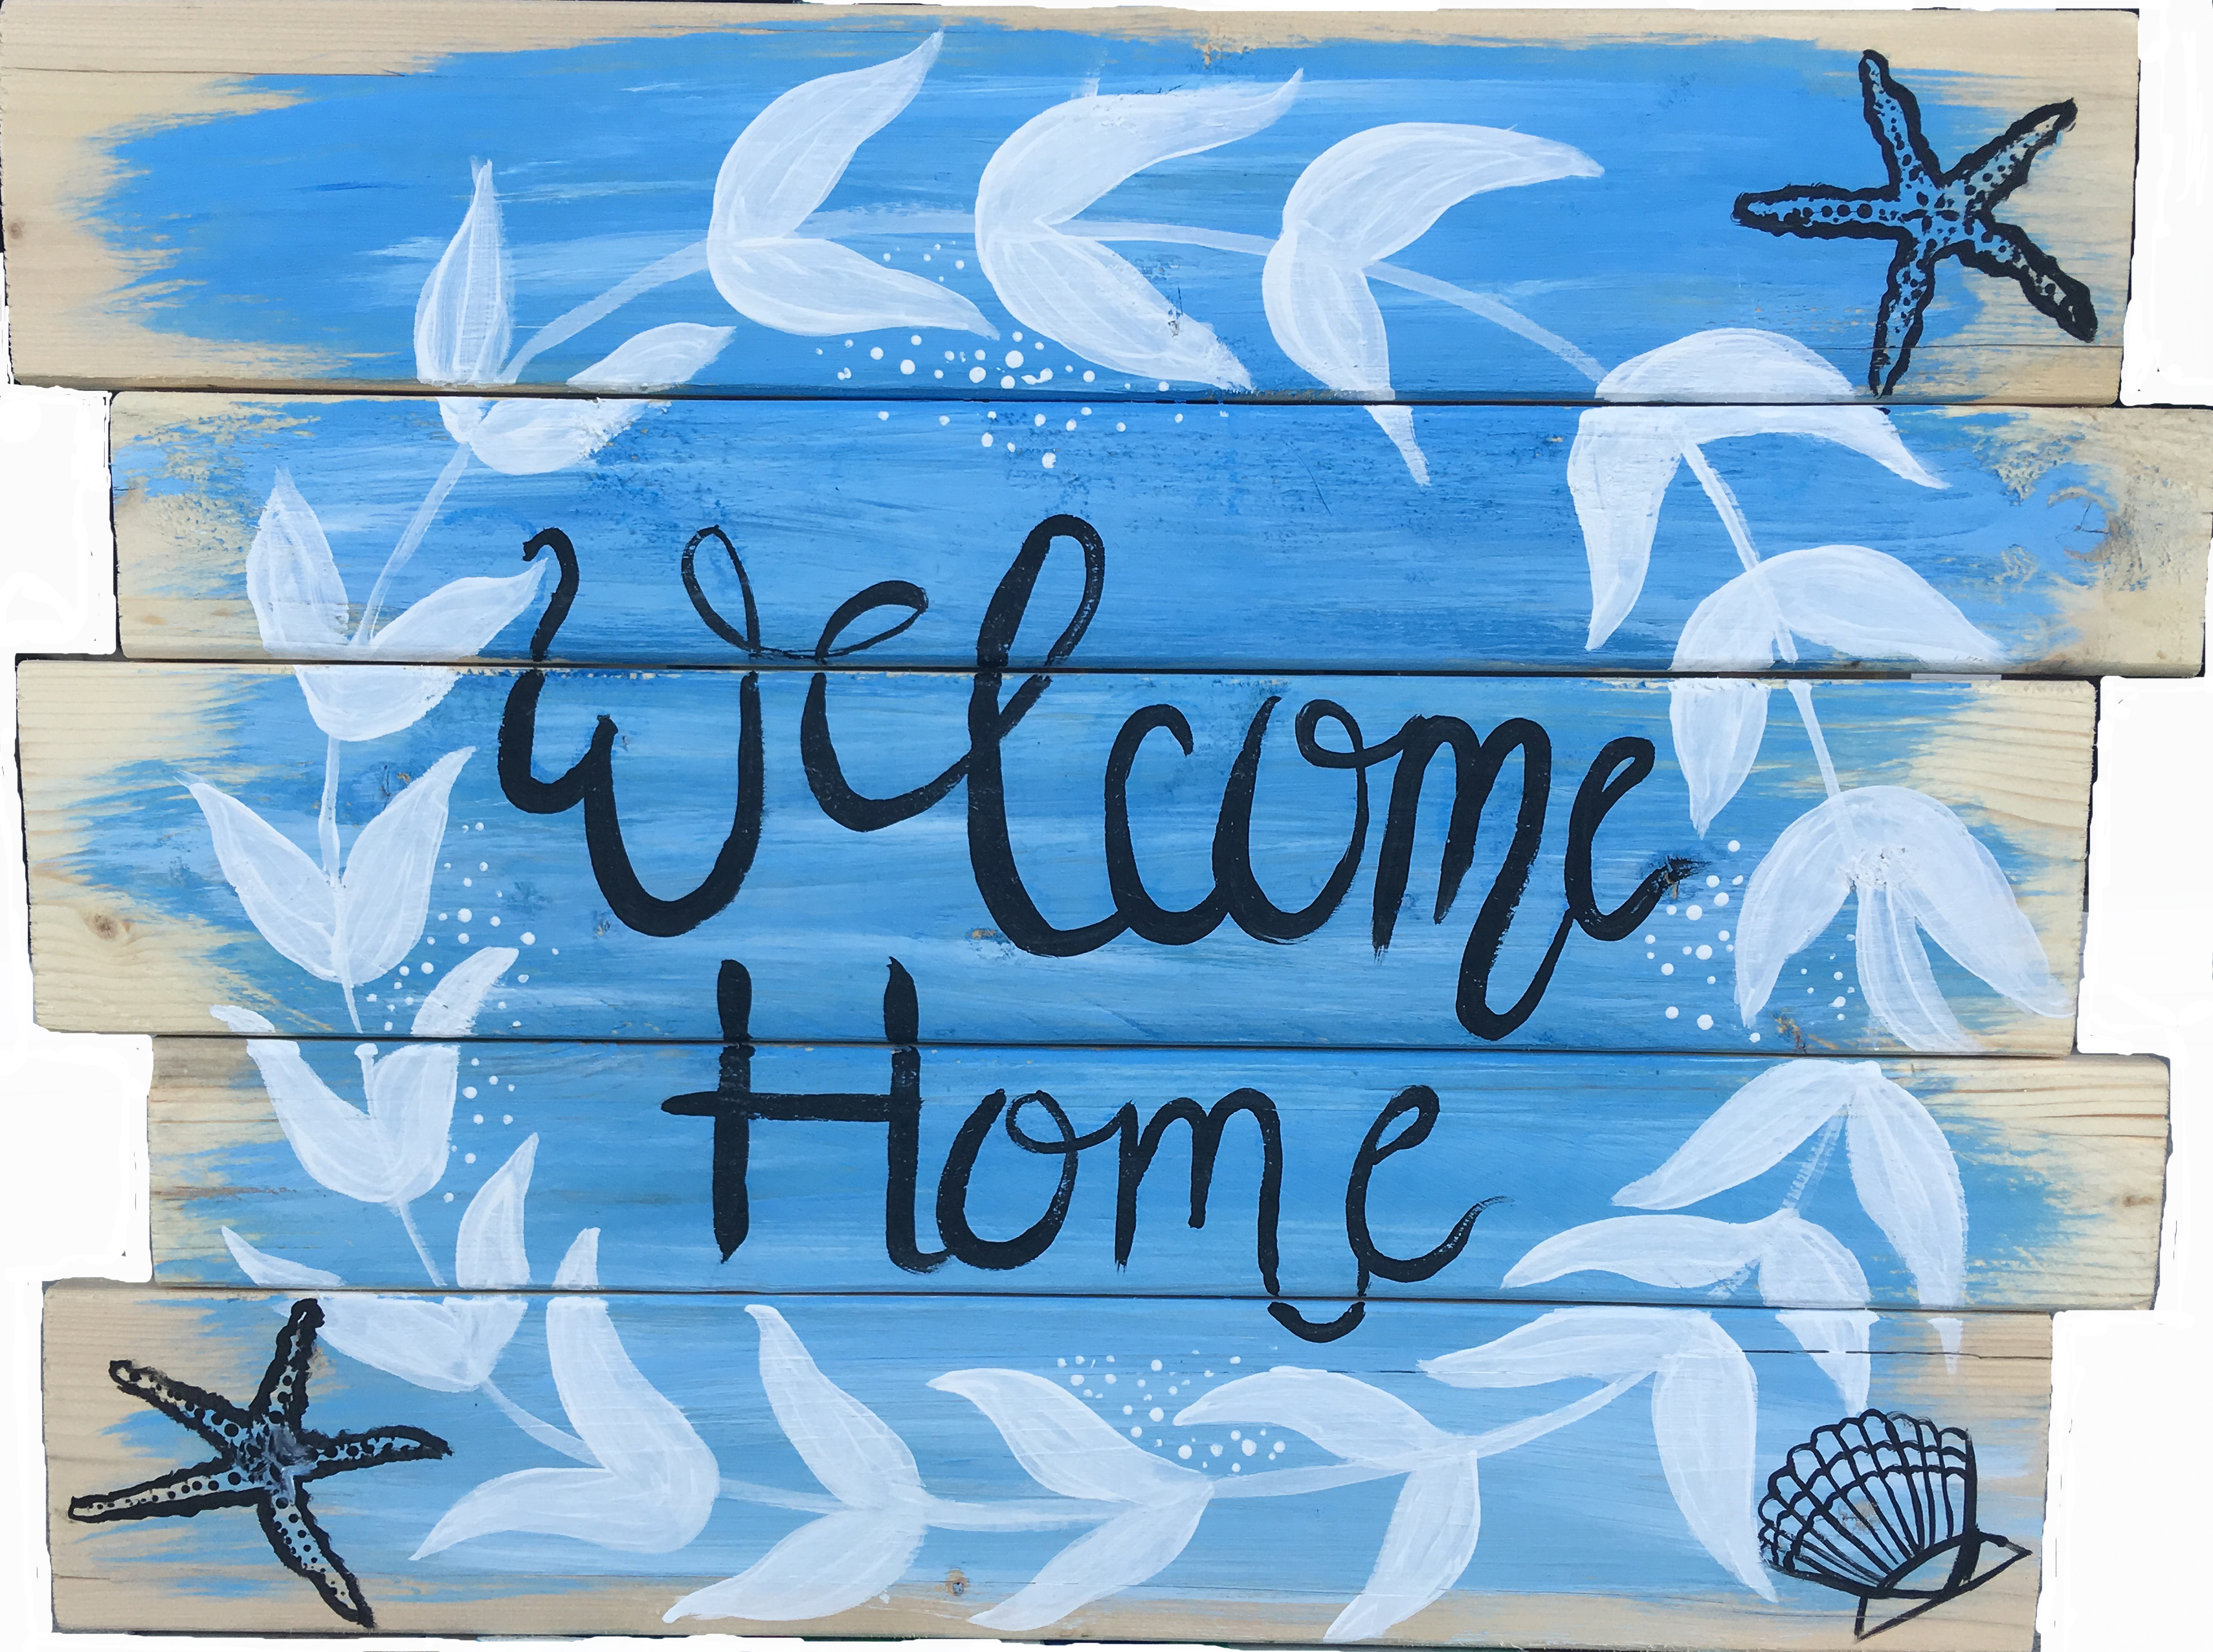 Wood Pallet Sign - Beach Welcome